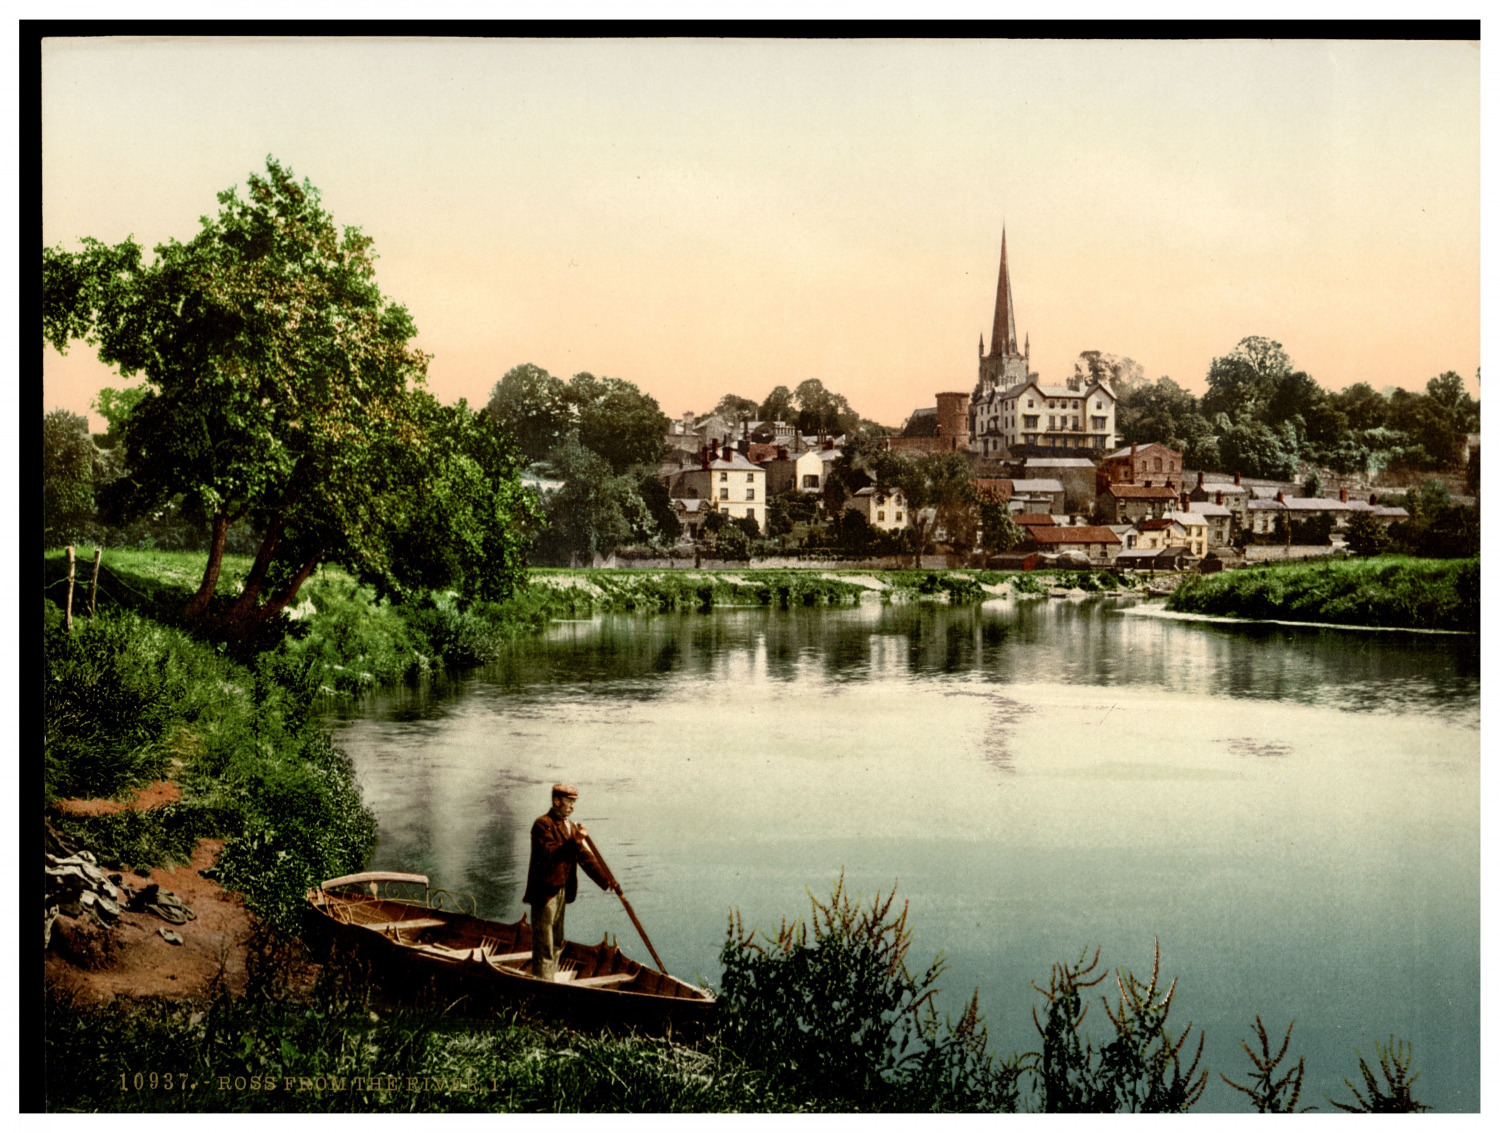 England. Wye Valley. Ross from the River I. Vintage Photochrome by P.Z, Photoc